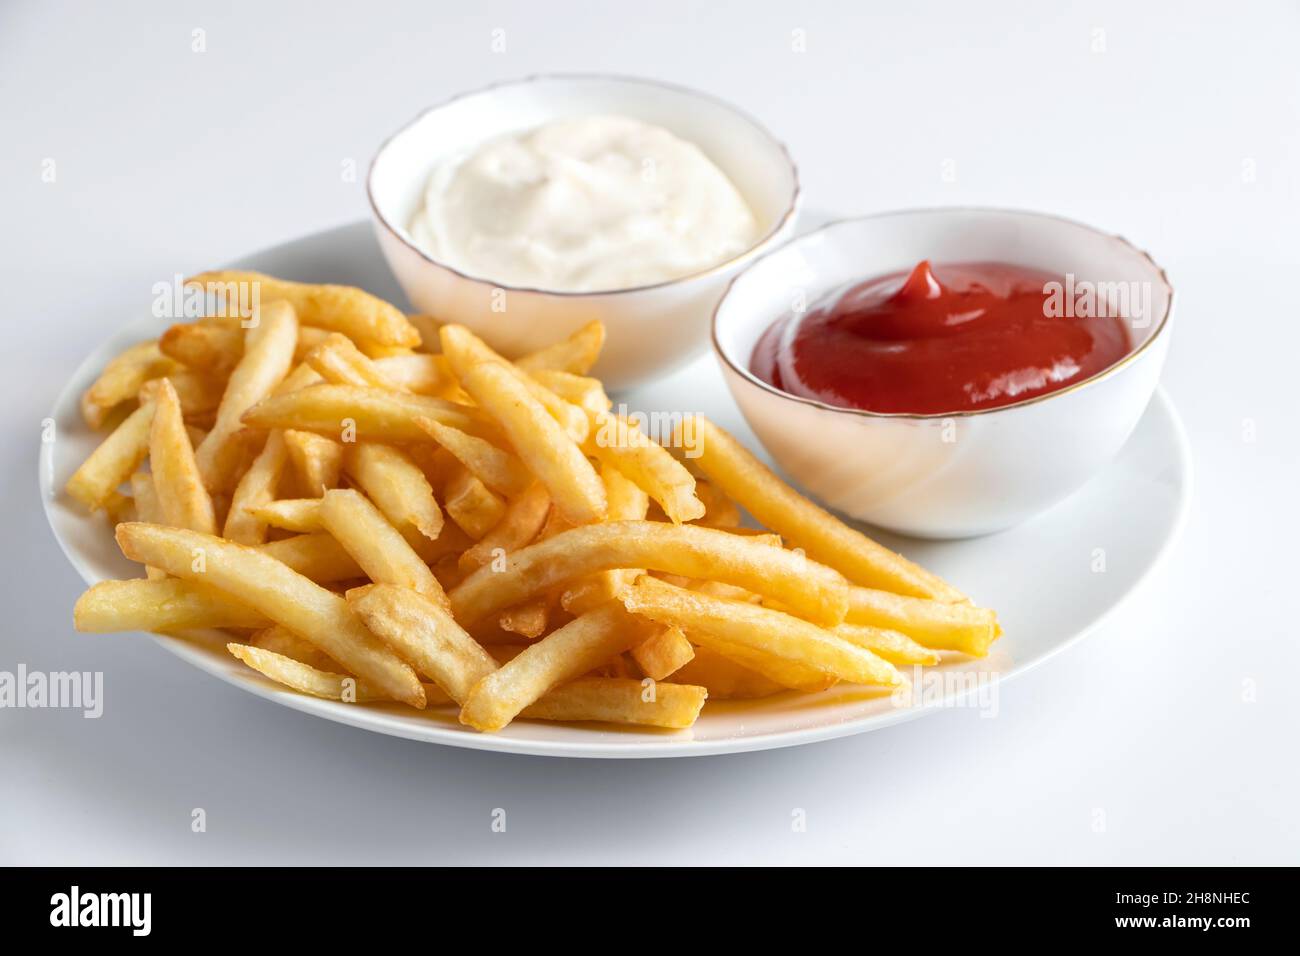 Crispy fries in a plate on a white background. Hot american fast food. Stock Photo